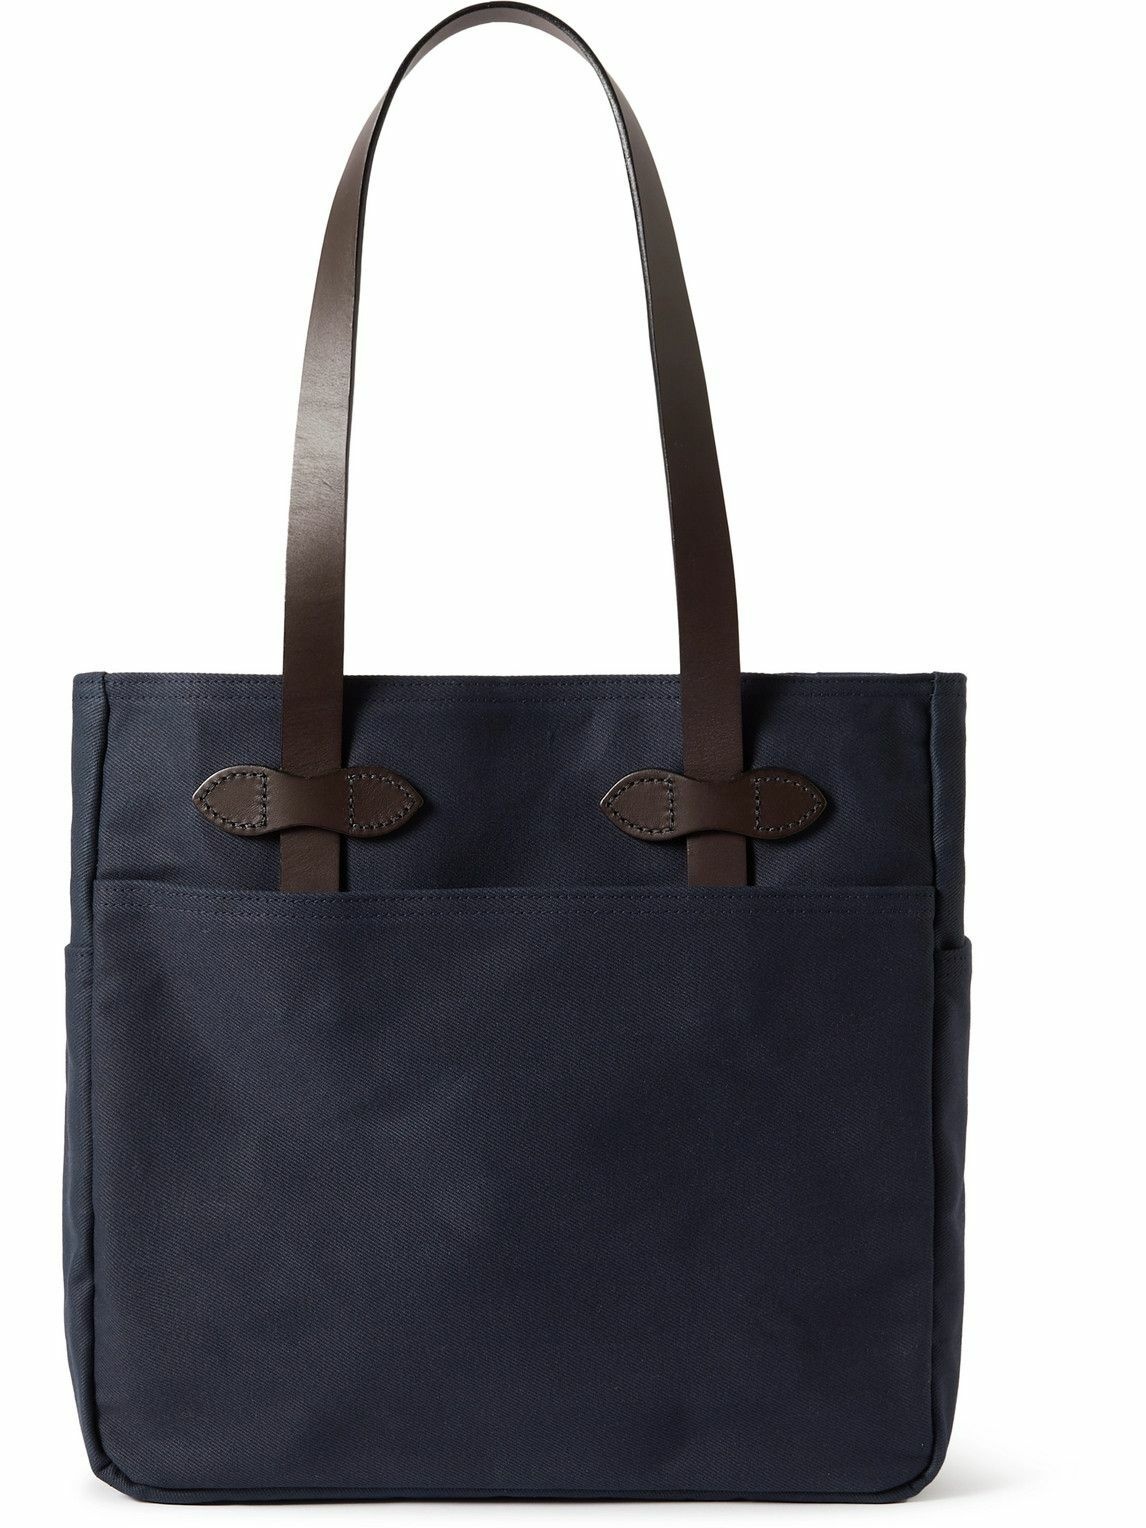 Photo: Filson - Leather-Trimmed Twill Tote Bag